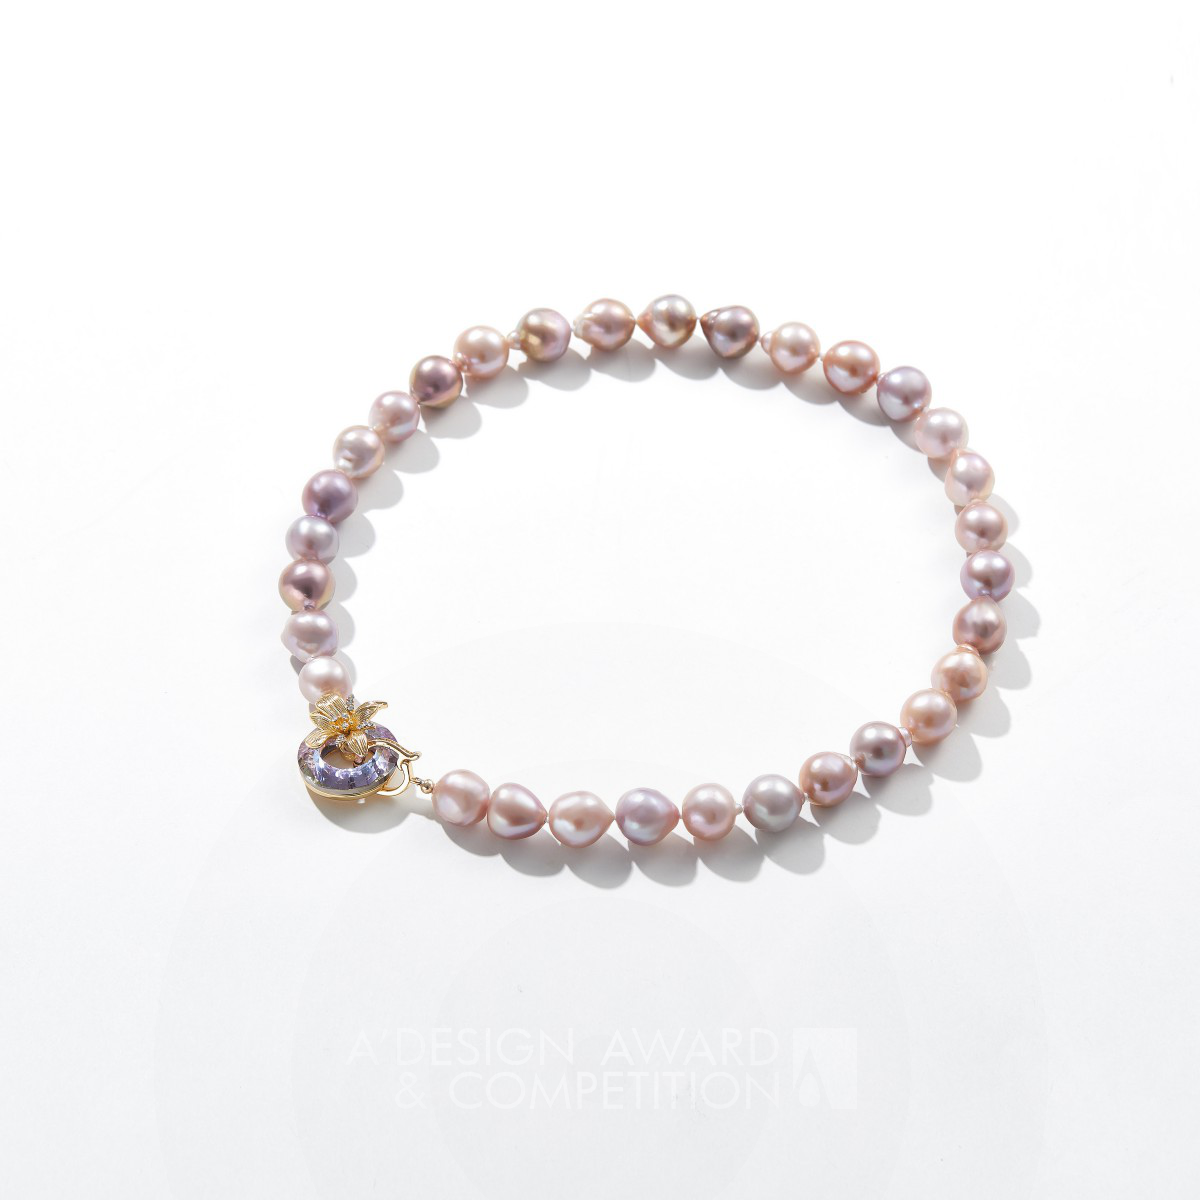 Binying Xu wins Bronze at the prestigious A' Jewelry Design Award with Purple Lily Pearl Necklace.